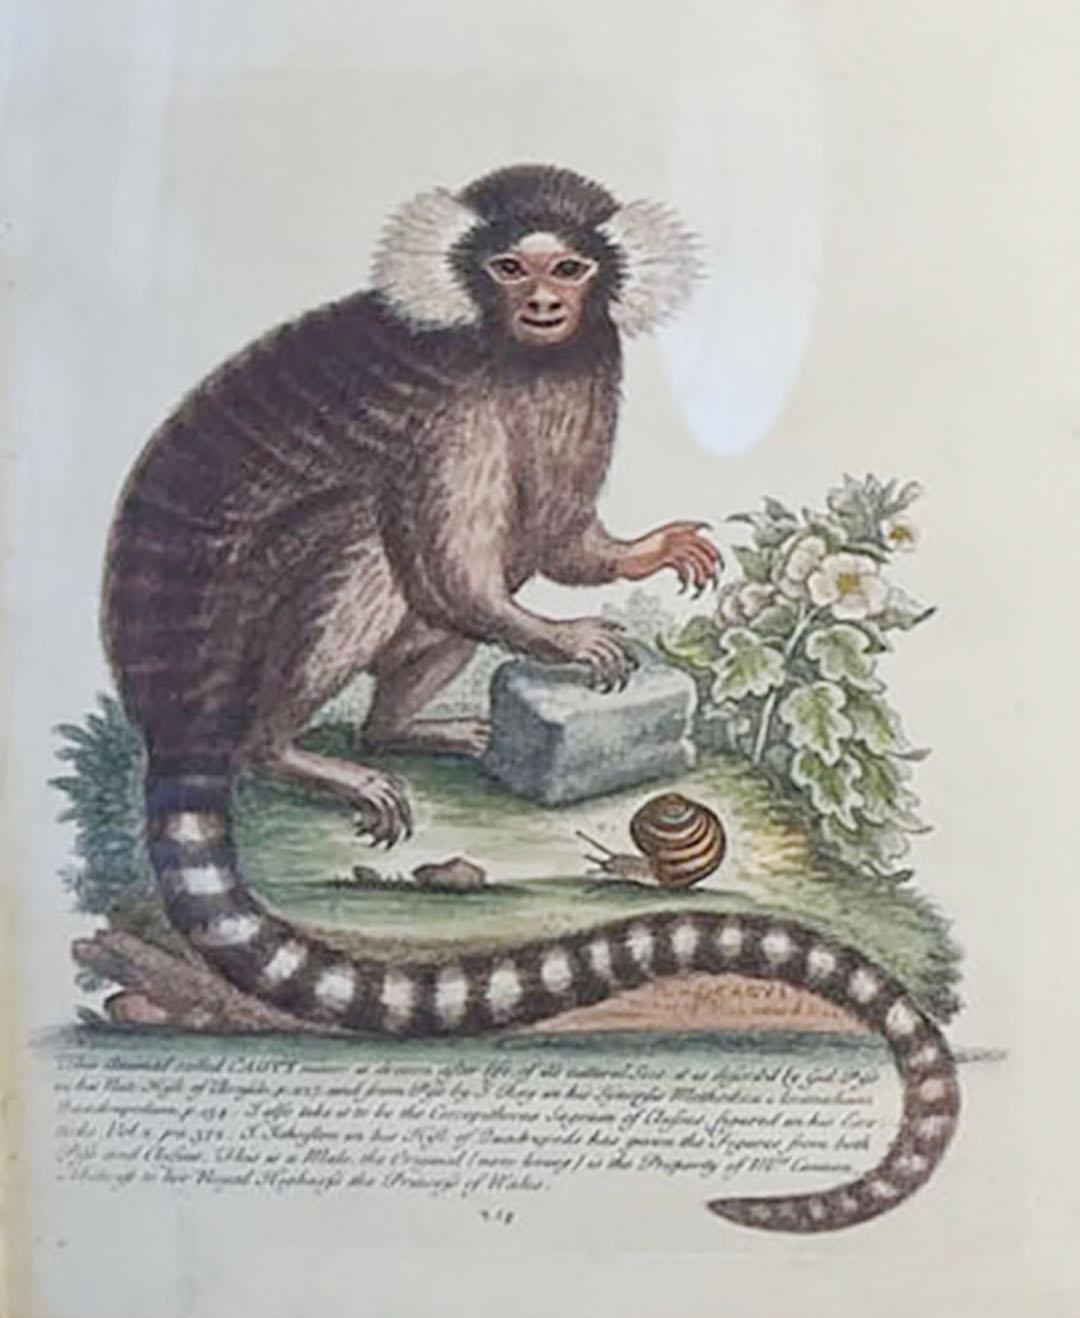 An antique engraving of a monkey called CAGVI minor, dated 1752 signed Edward Delin Anno. In a newer eglomise and guided wood frame with fruits, leaves and insects.
